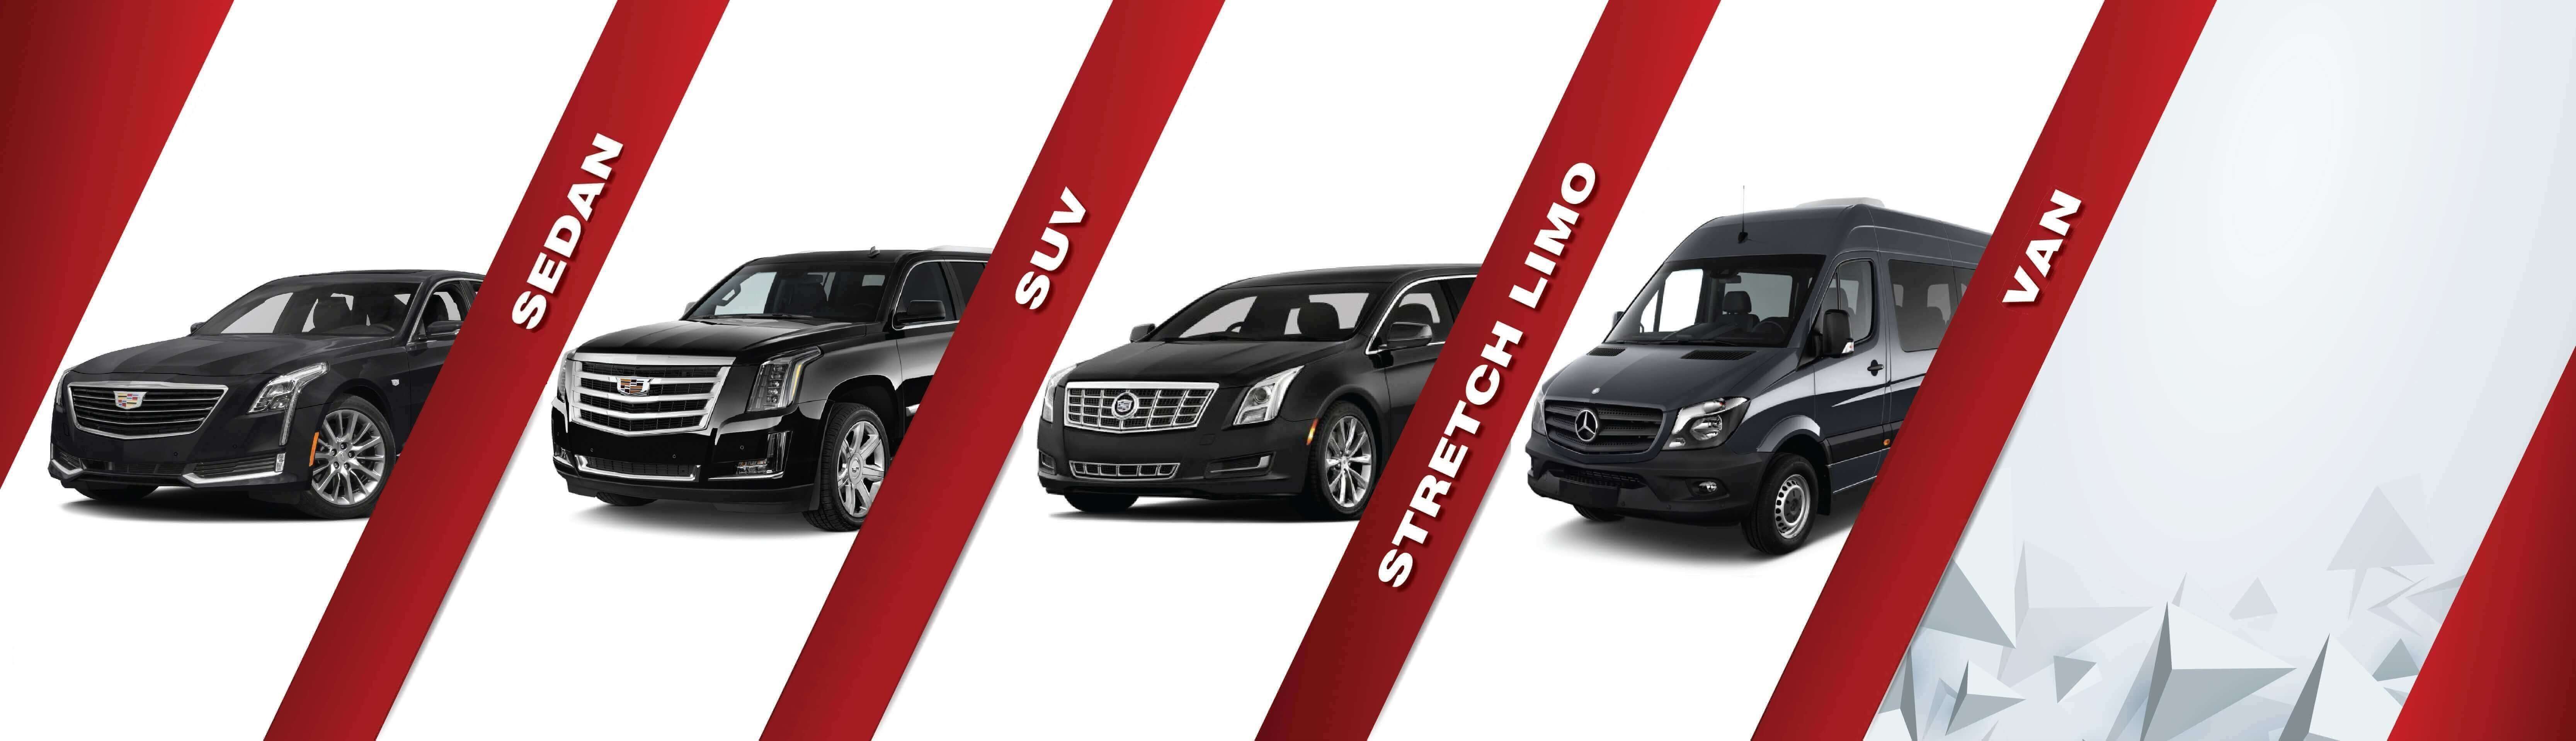 all type of vehicles in the fleet along with hourly prices. sedans, SUV, stretch limo and van are depicted